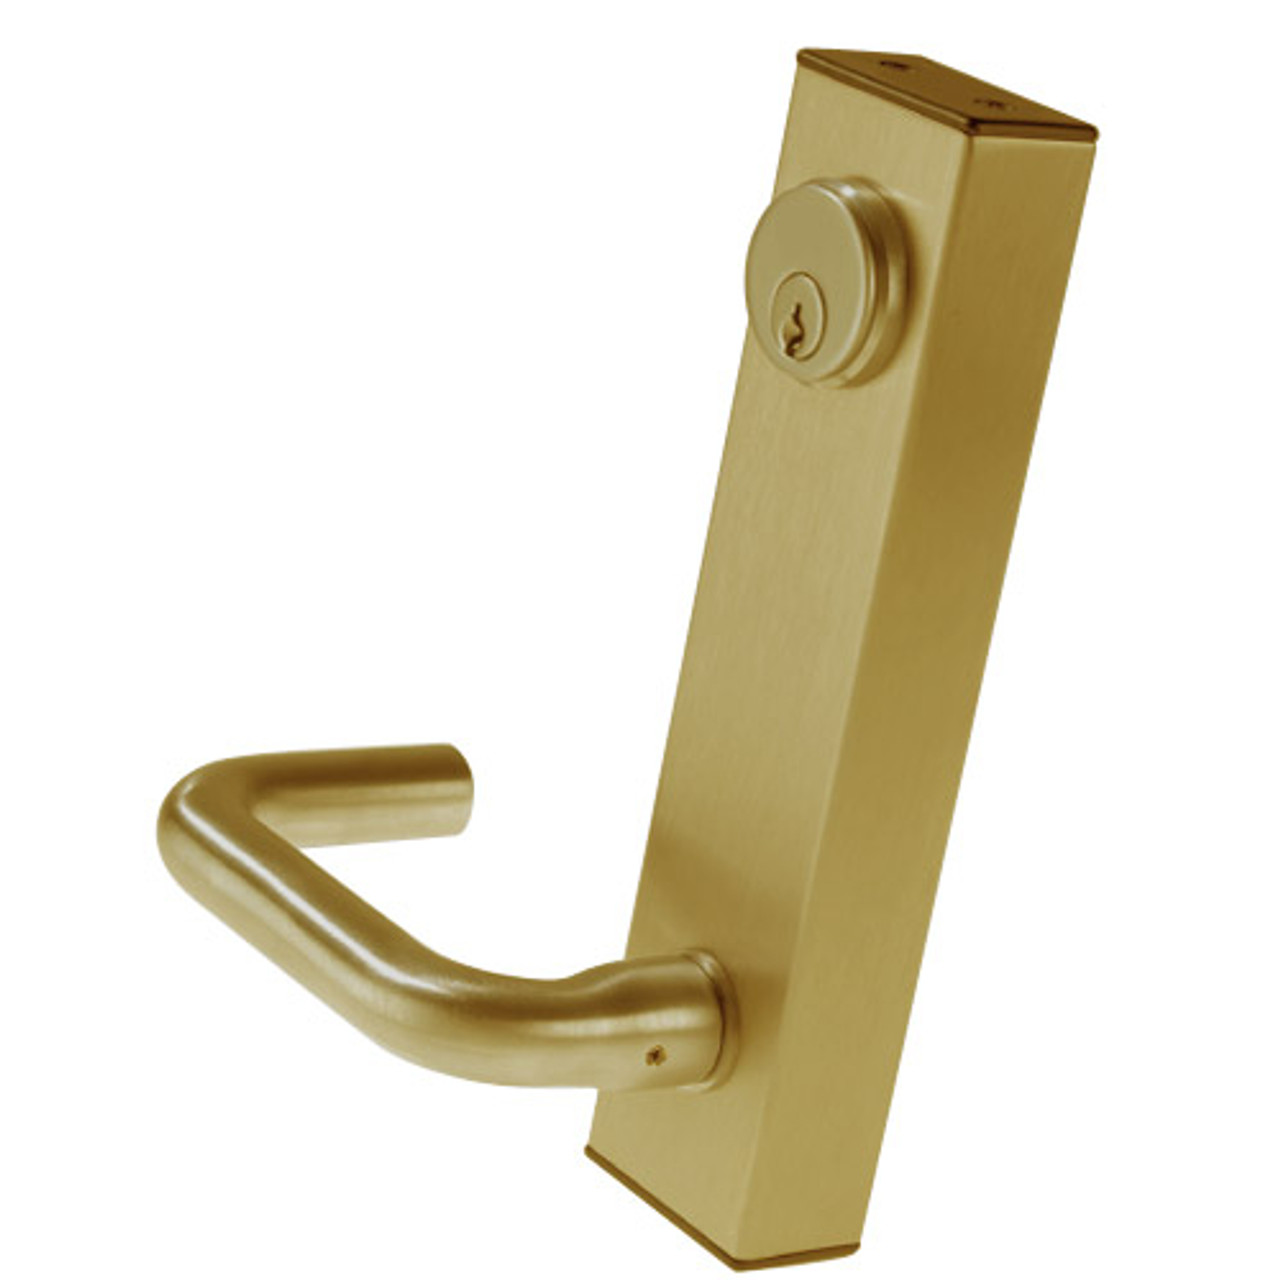 3080E-02-0-3U-55 US4 Adams Rite Electrified Entry Trim with Round Lever in Satin Brass Finish